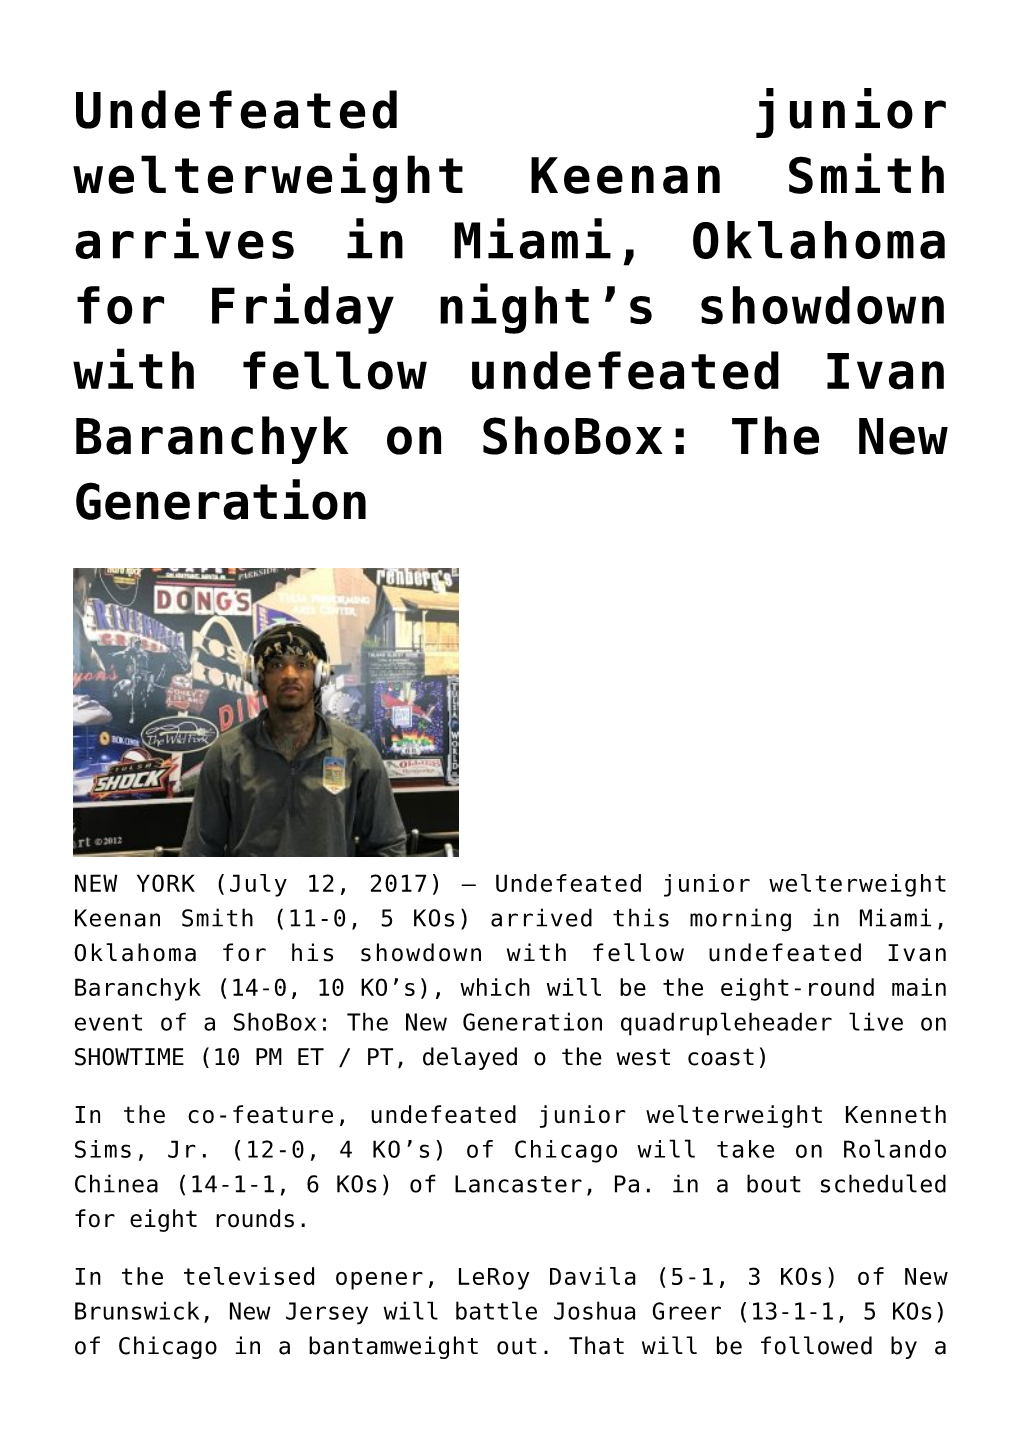 Undefeated Junior Welterweight Keenan Smith Arrives in Miami, Oklahoma for Friday Night’S Showdown with Fellow Undefeated Ivan Baranchyk on Shobox: the New Generation